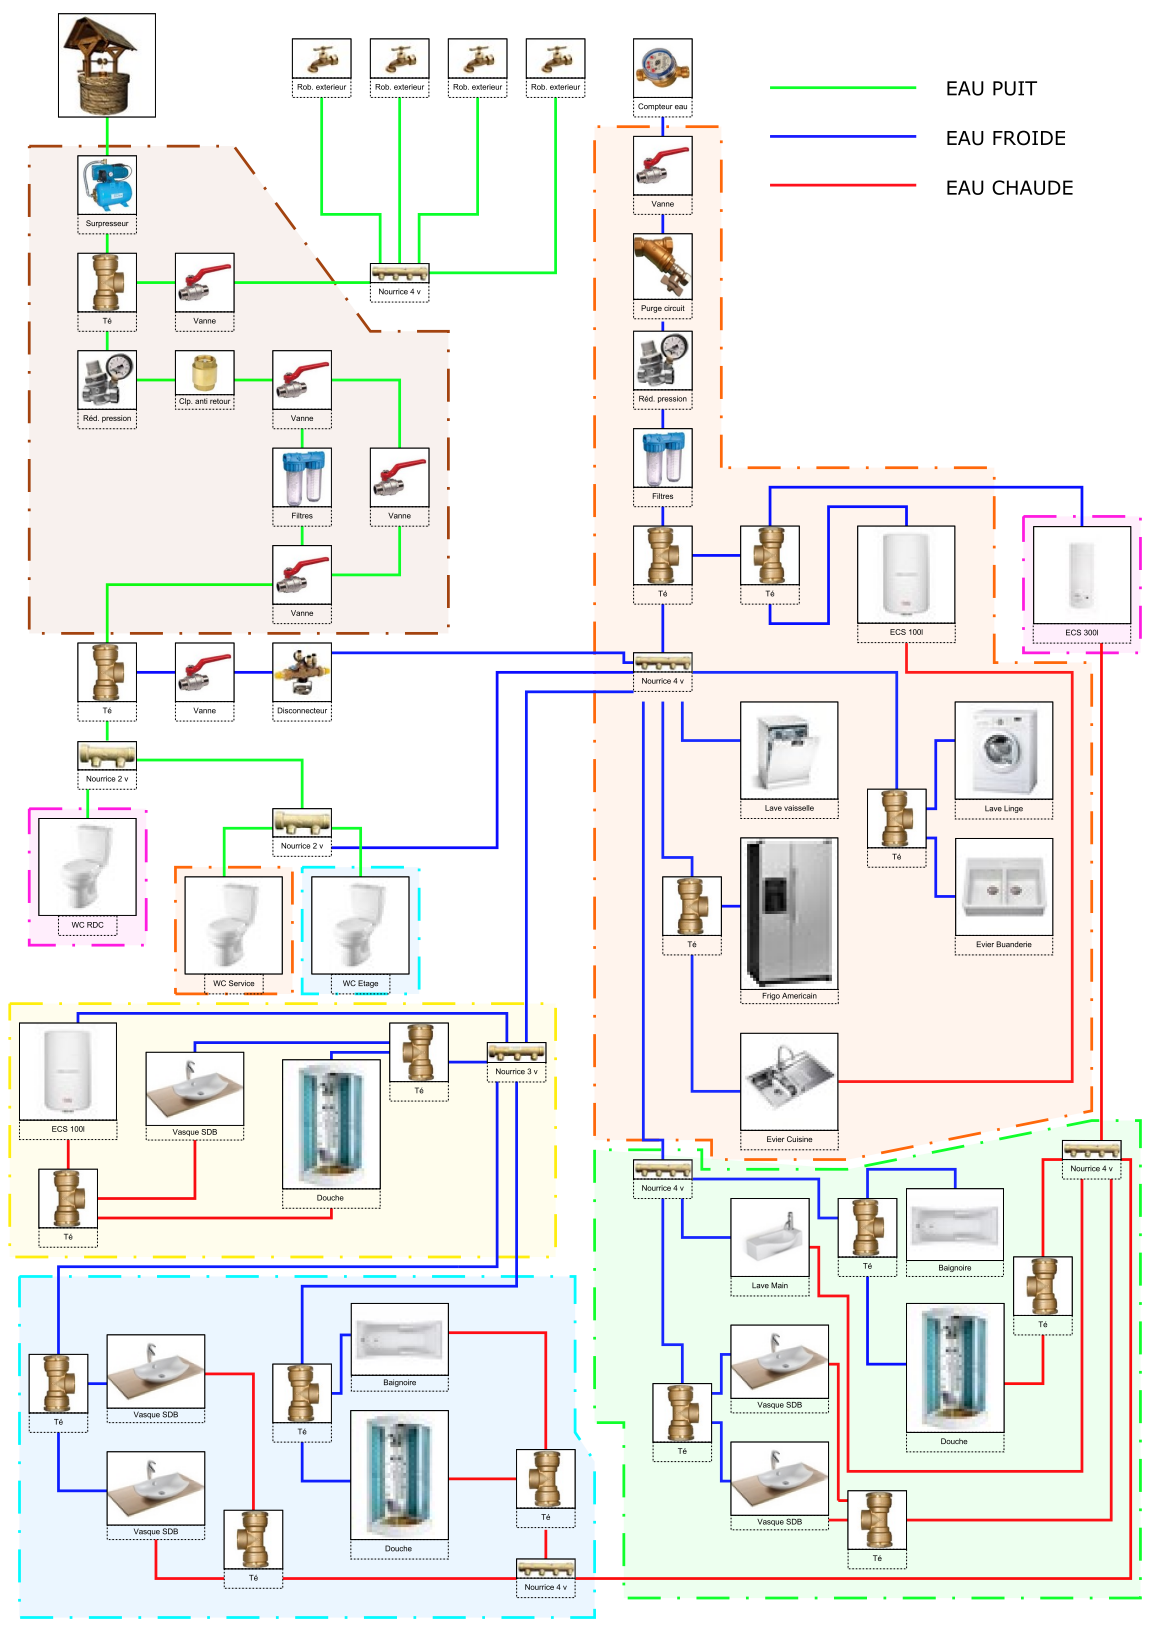 Plan plomberie 3.png, 697.3 kb, 1158 x 1637